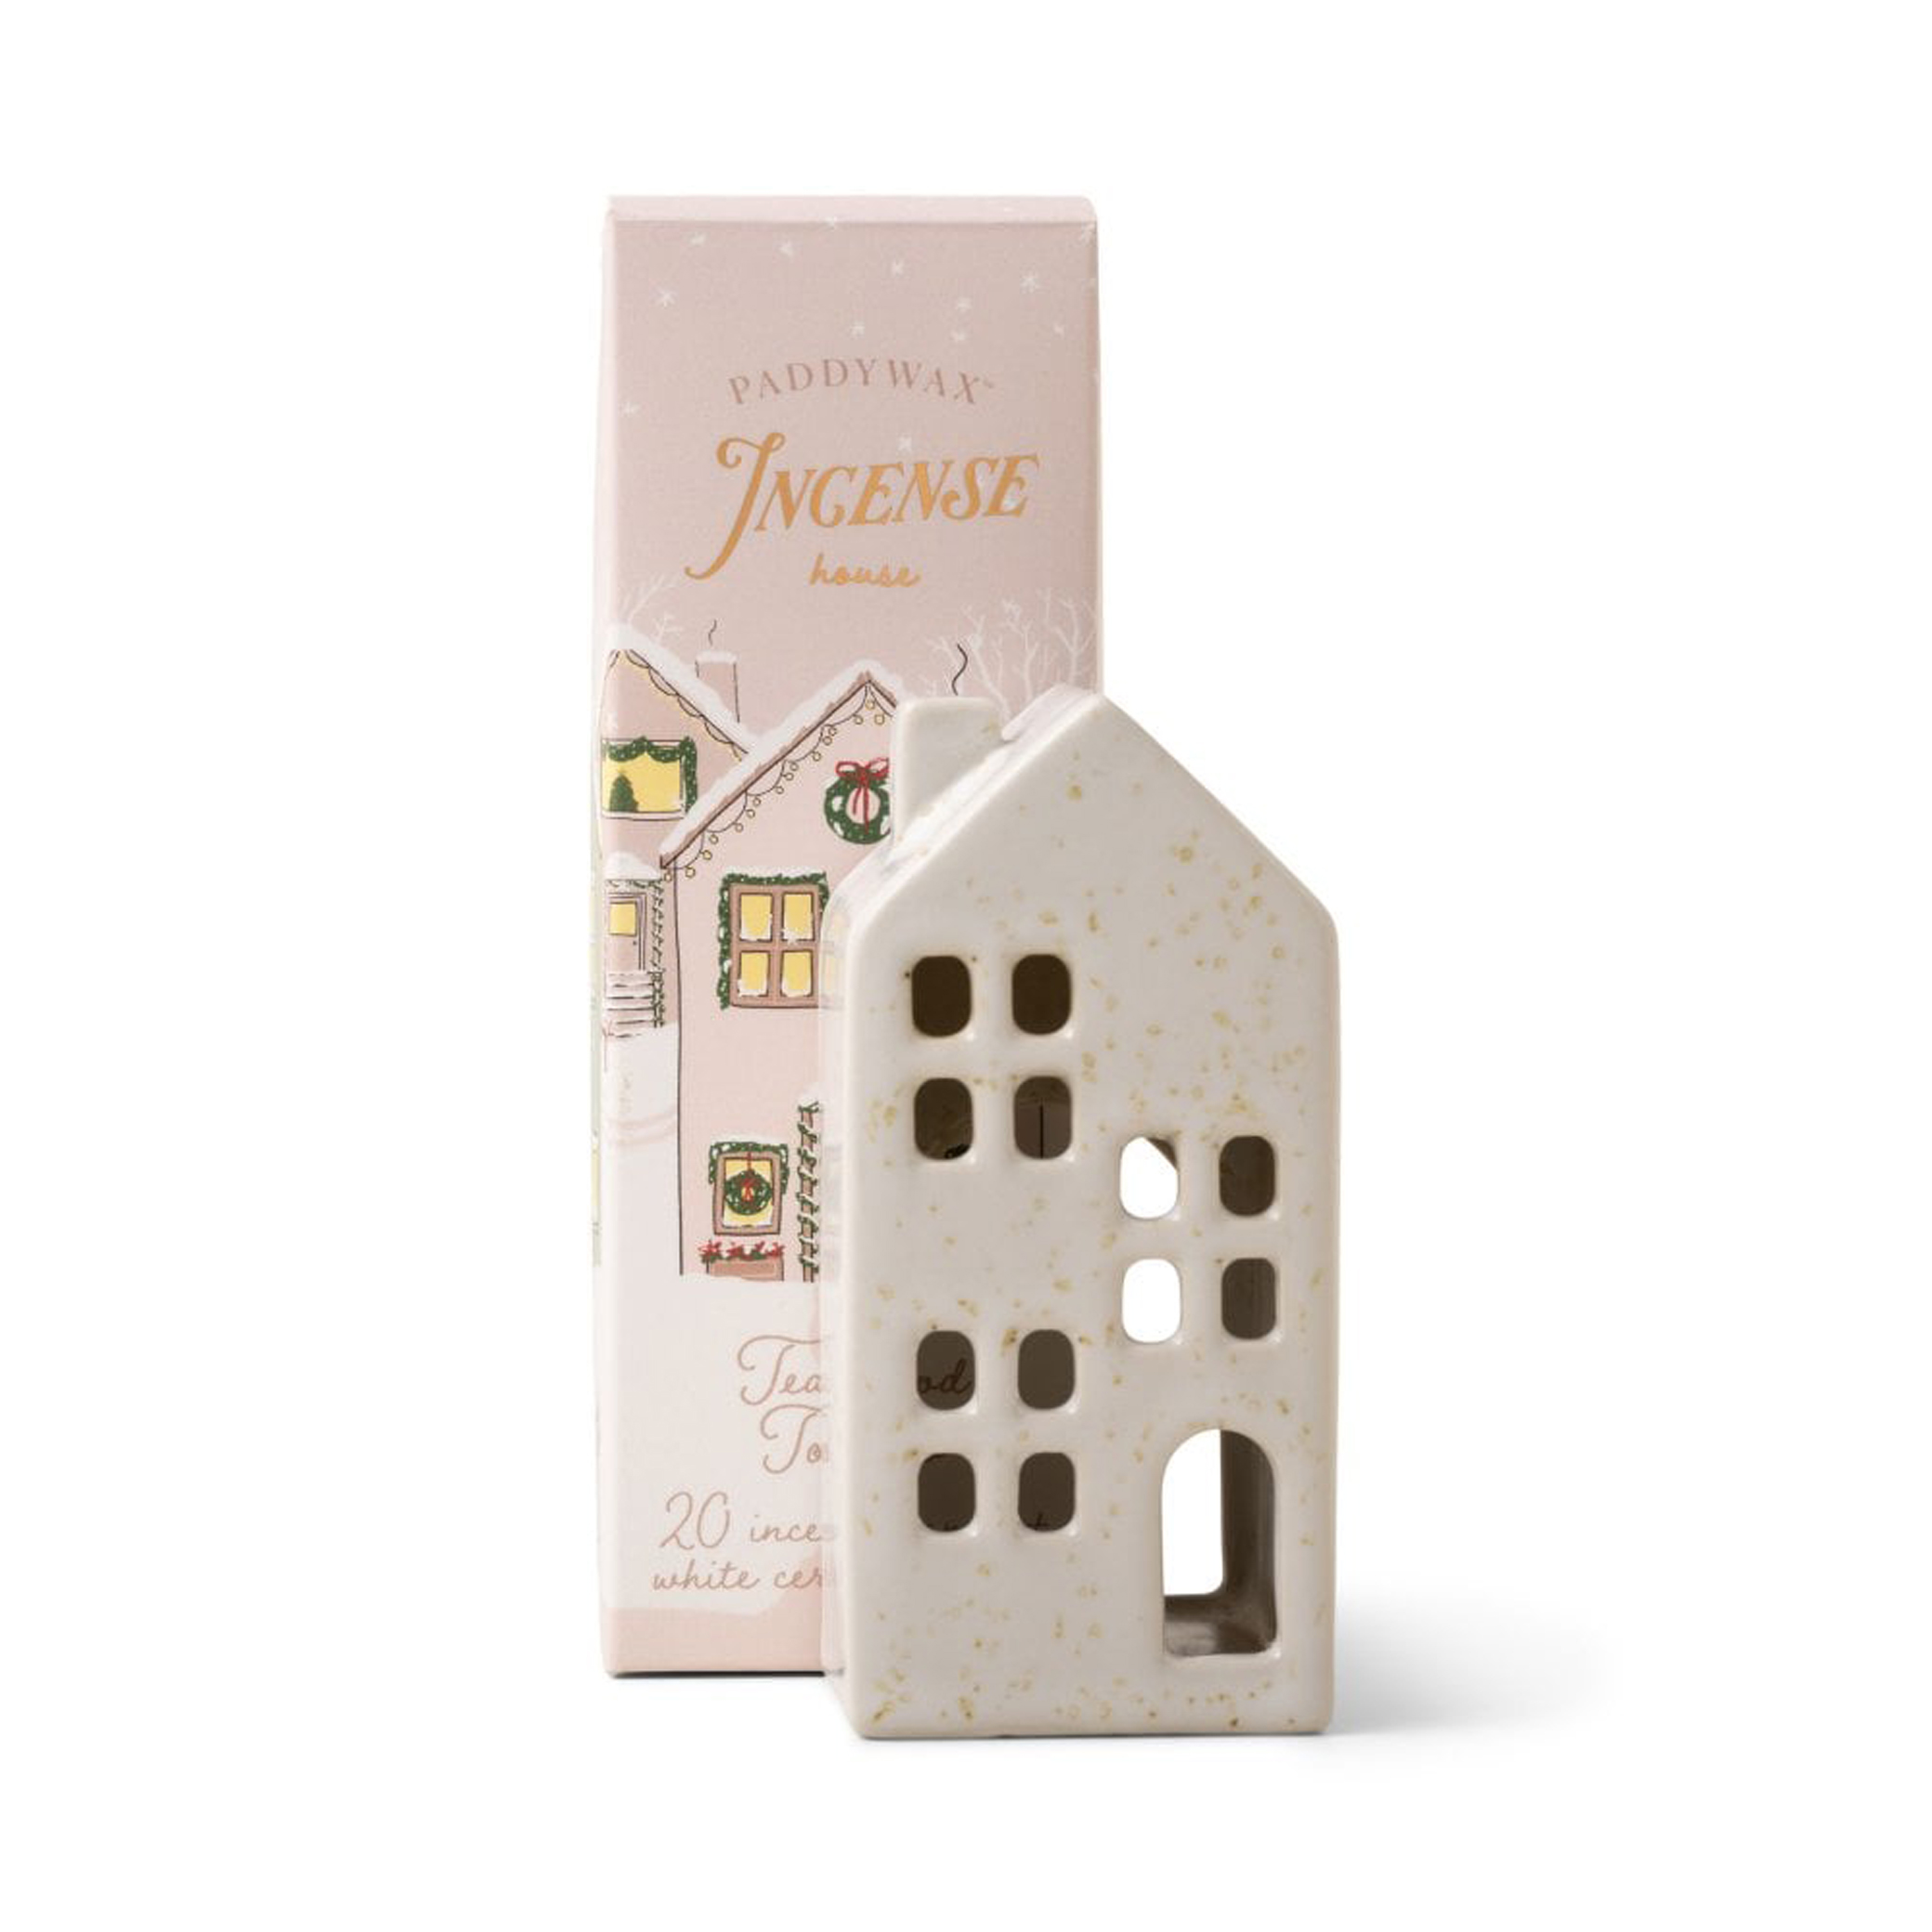 Paddywax White Incense Town House - Teakwood & Tobacco (Inc 20 Cones)